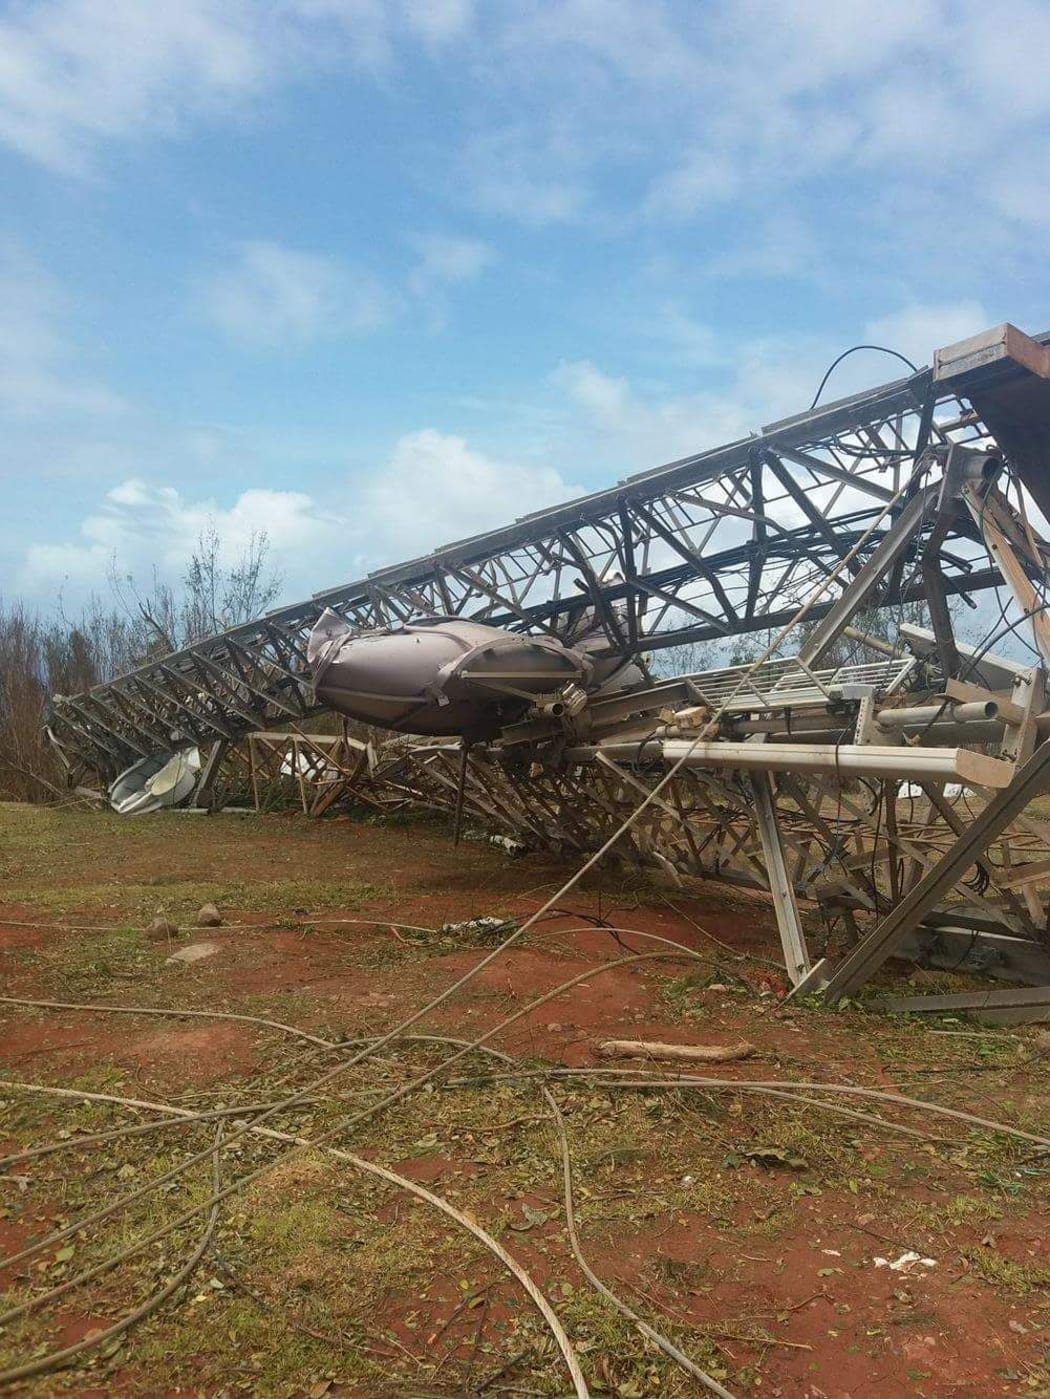 A major communication tower for Fiji's remote Lau island group was completely crumpled by Cyclone Winston.